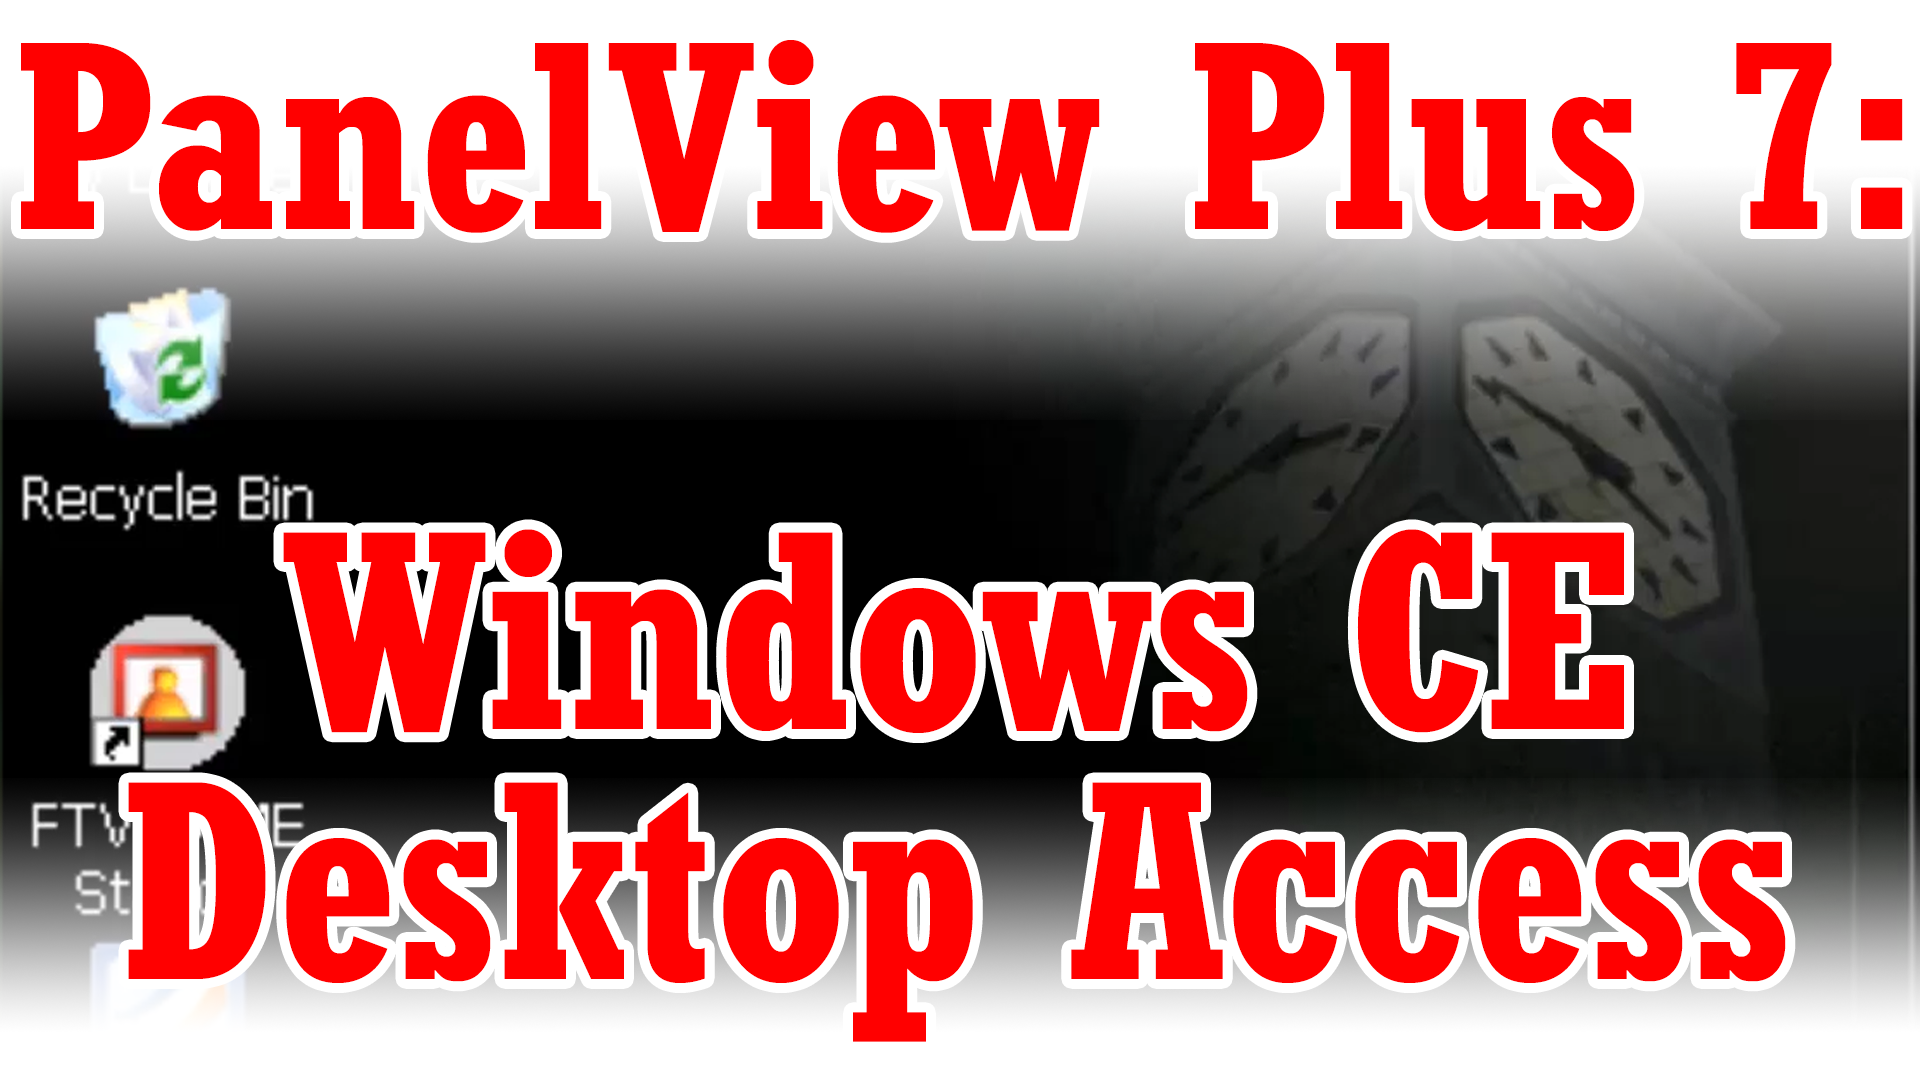 PanelView Plus 7 - How to access the Windows Desktop